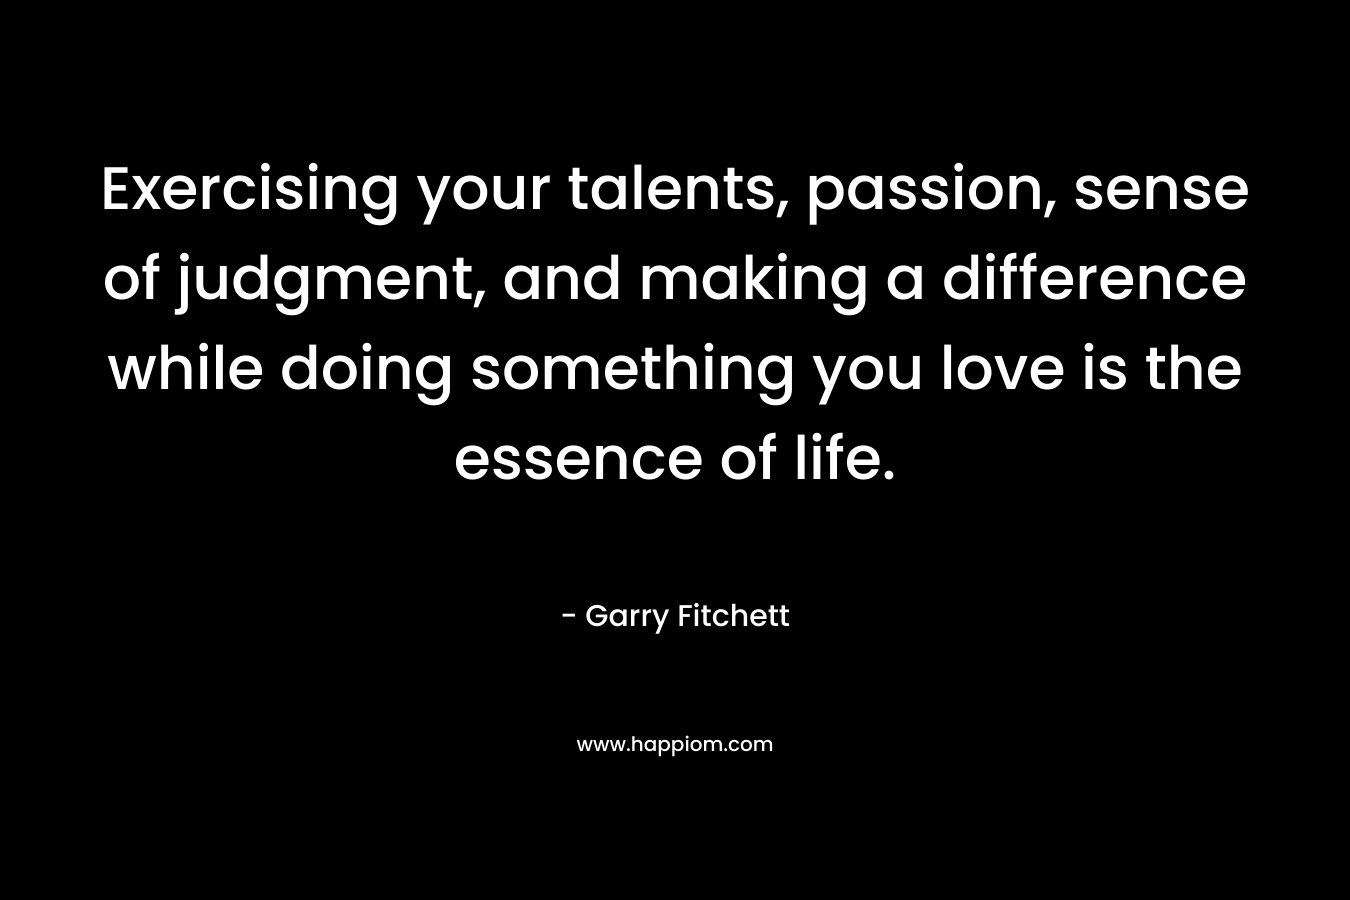 Exercising your talents, passion, sense of judgment, and making a difference while doing something you love is the essence of life. – Garry Fitchett